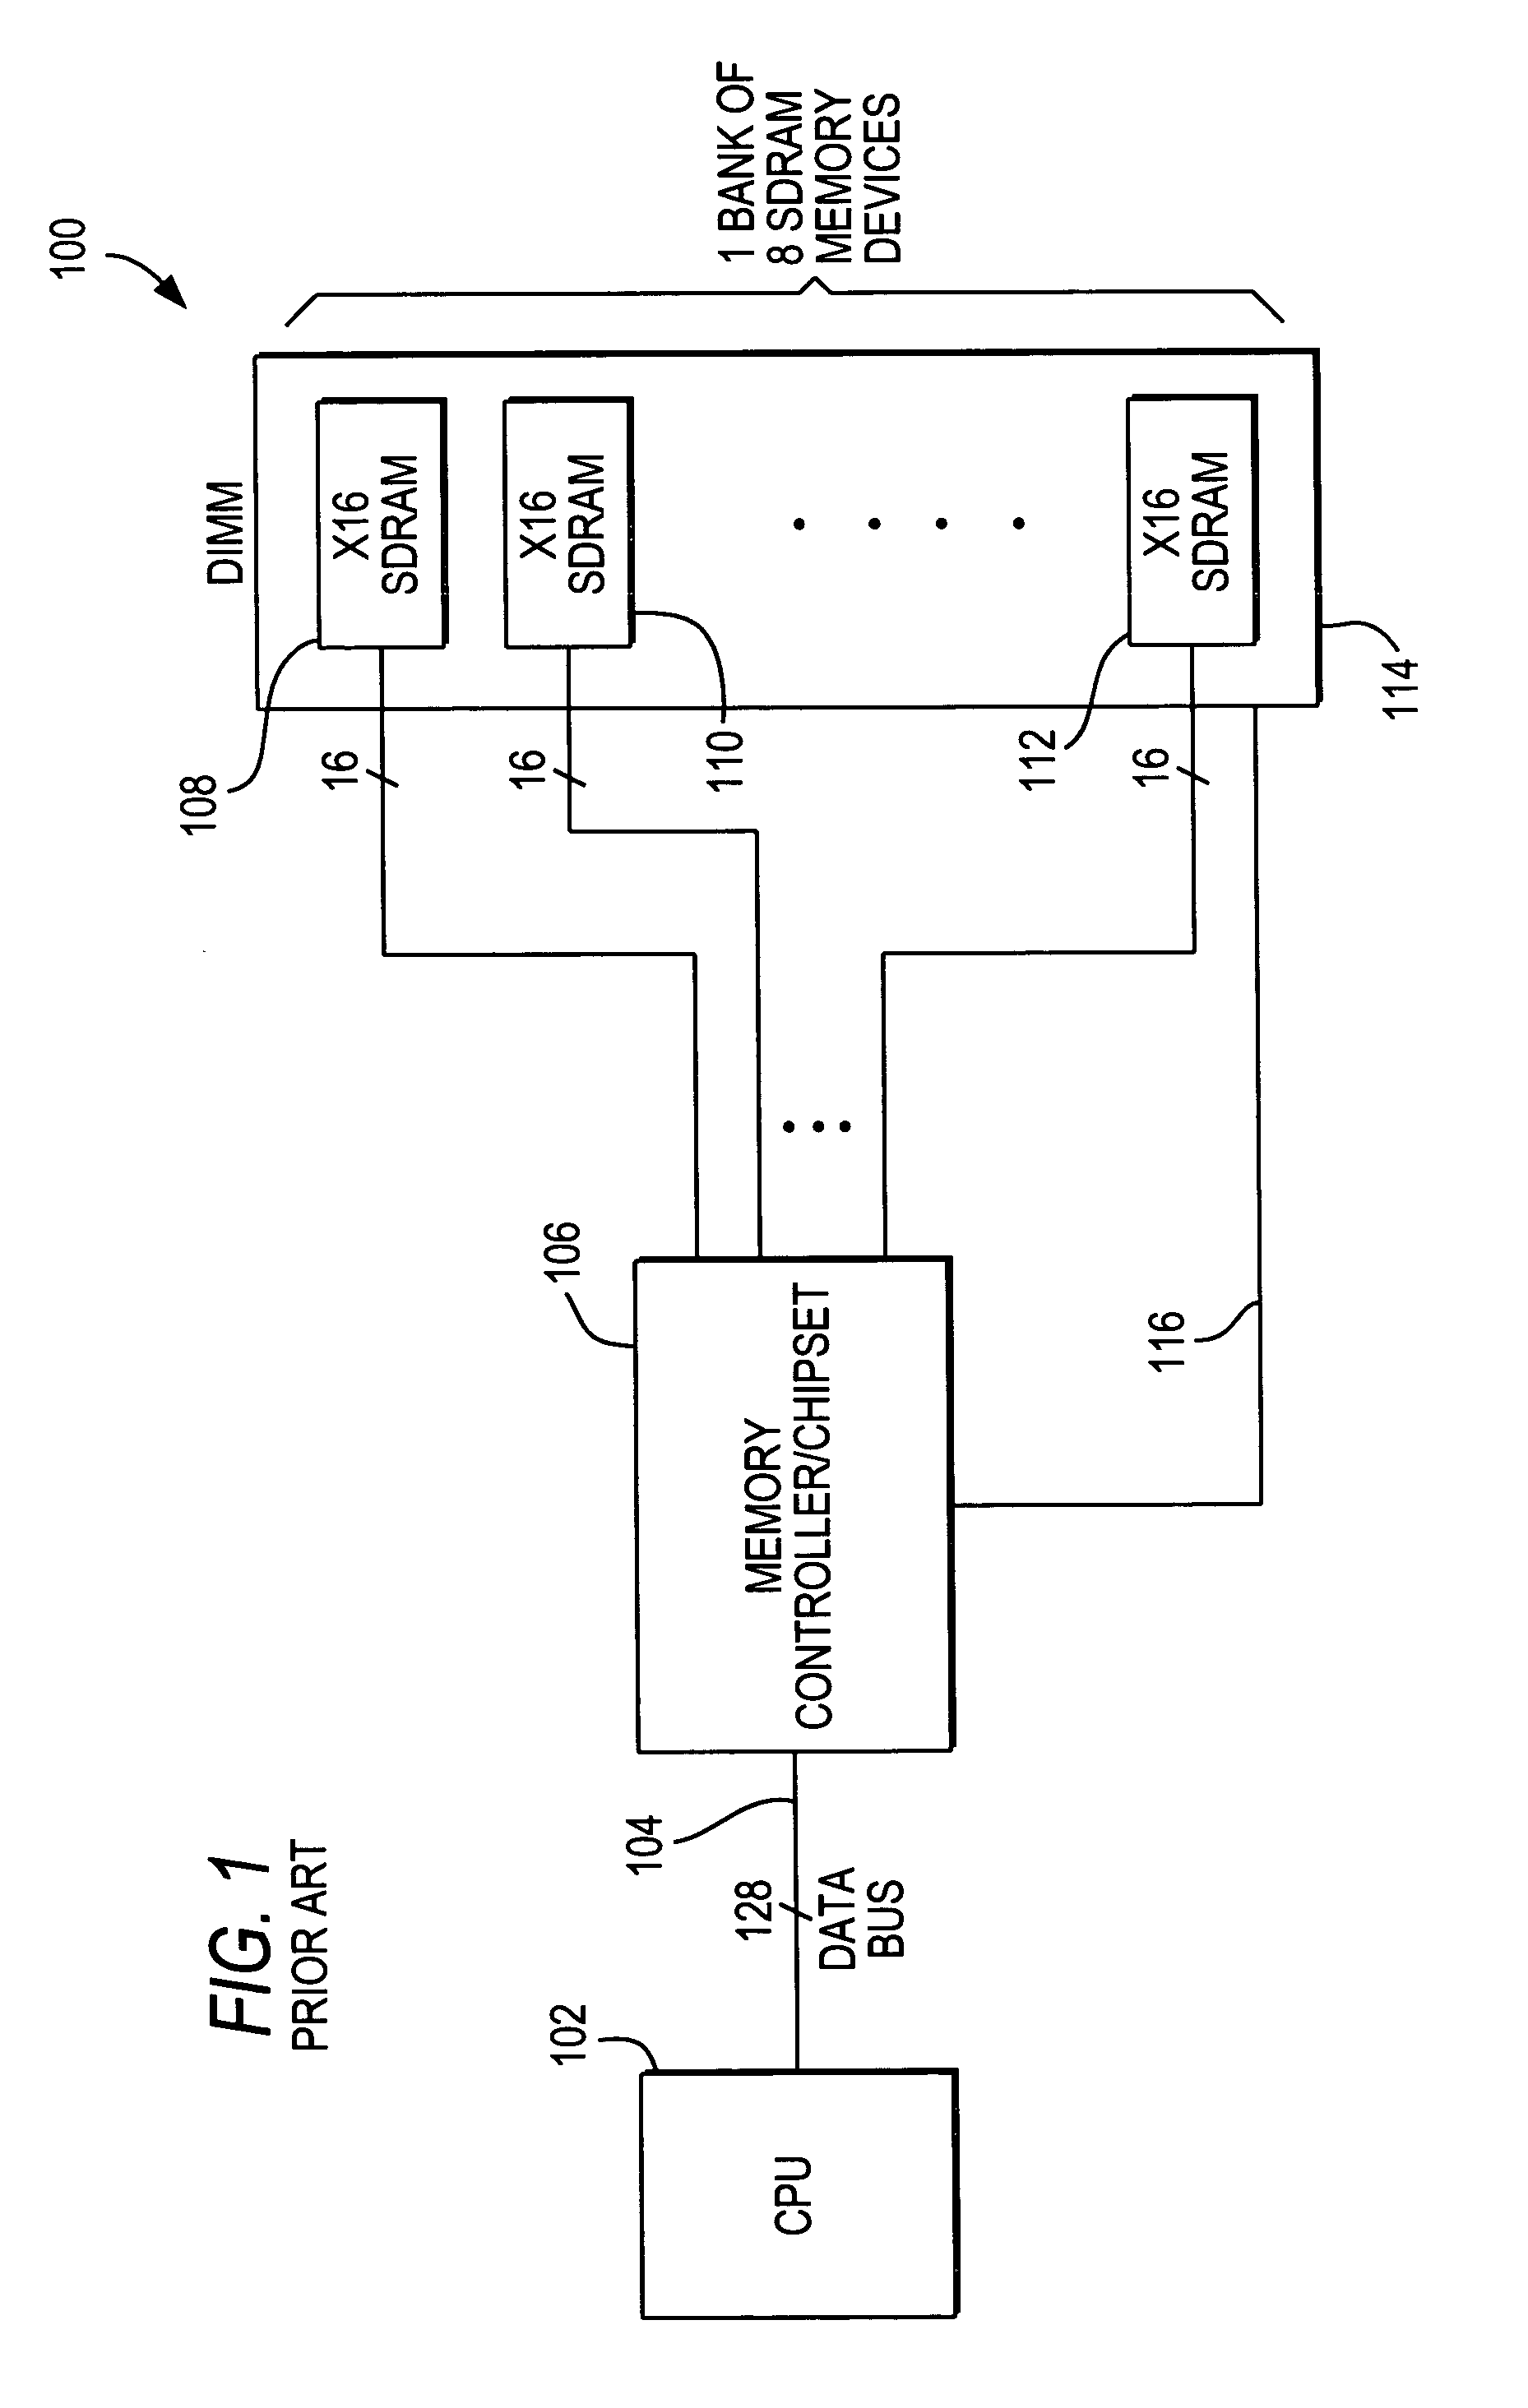 Memory devices with buffered command address bus